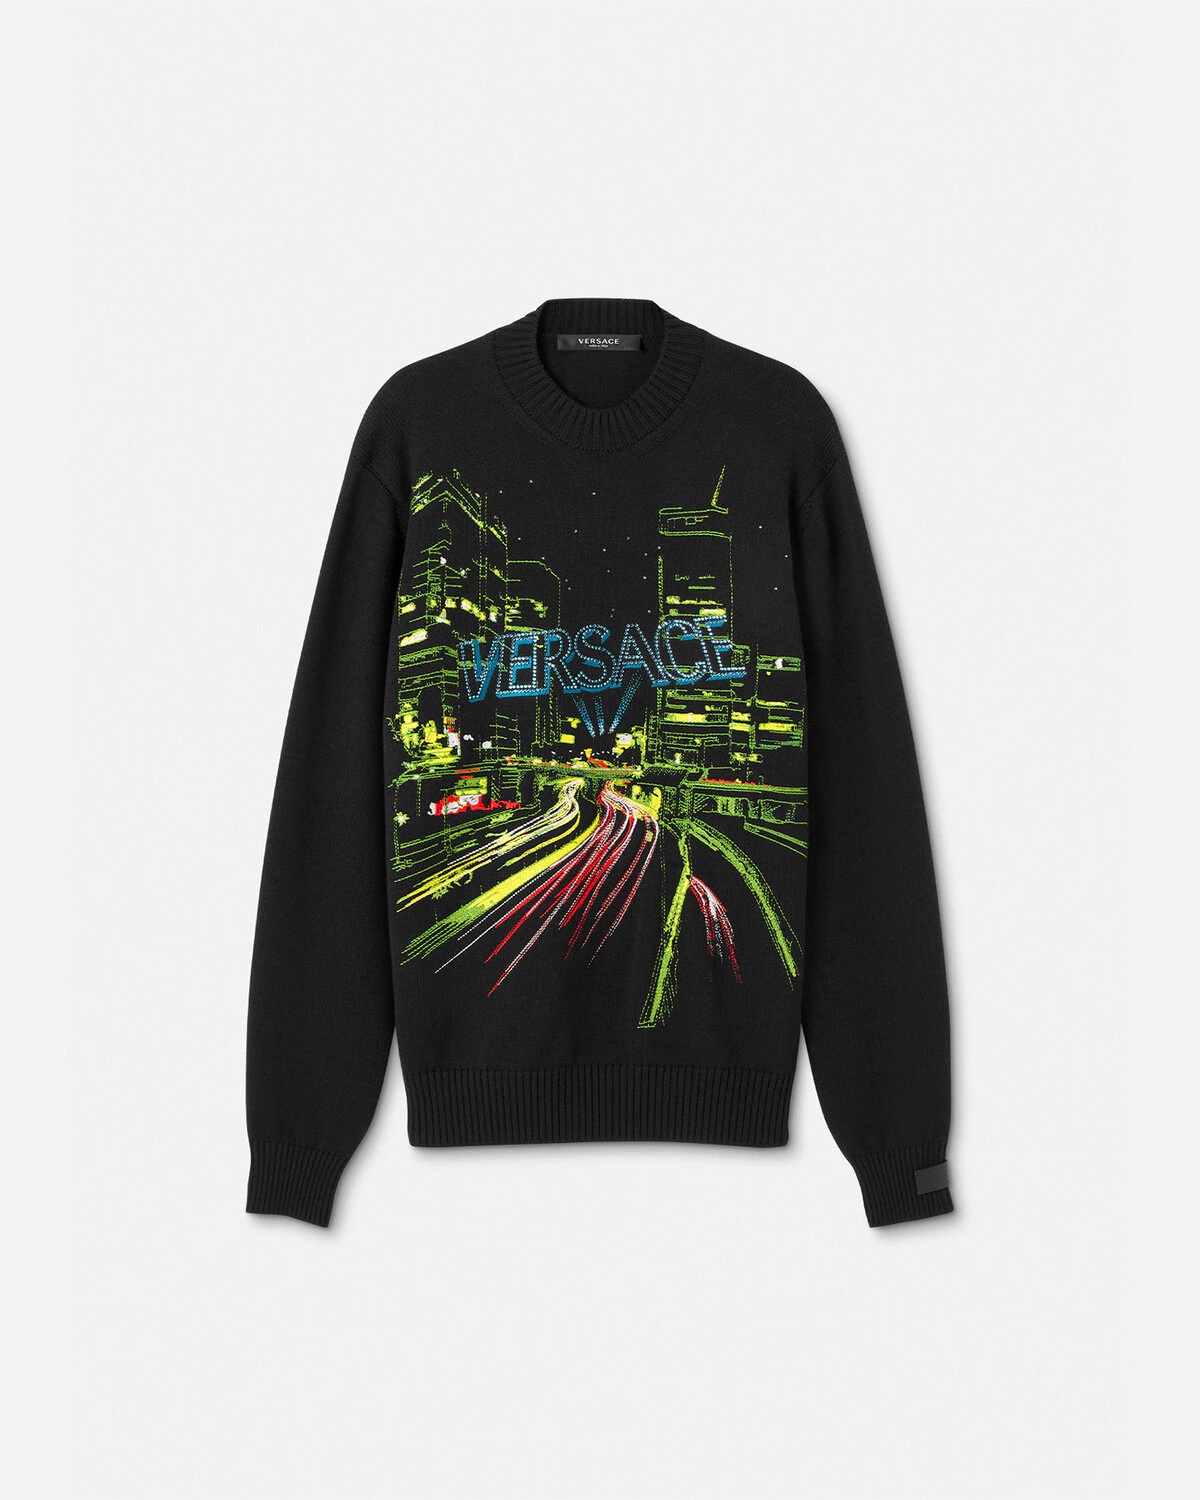 Embroidered City Lights Sweater - 1